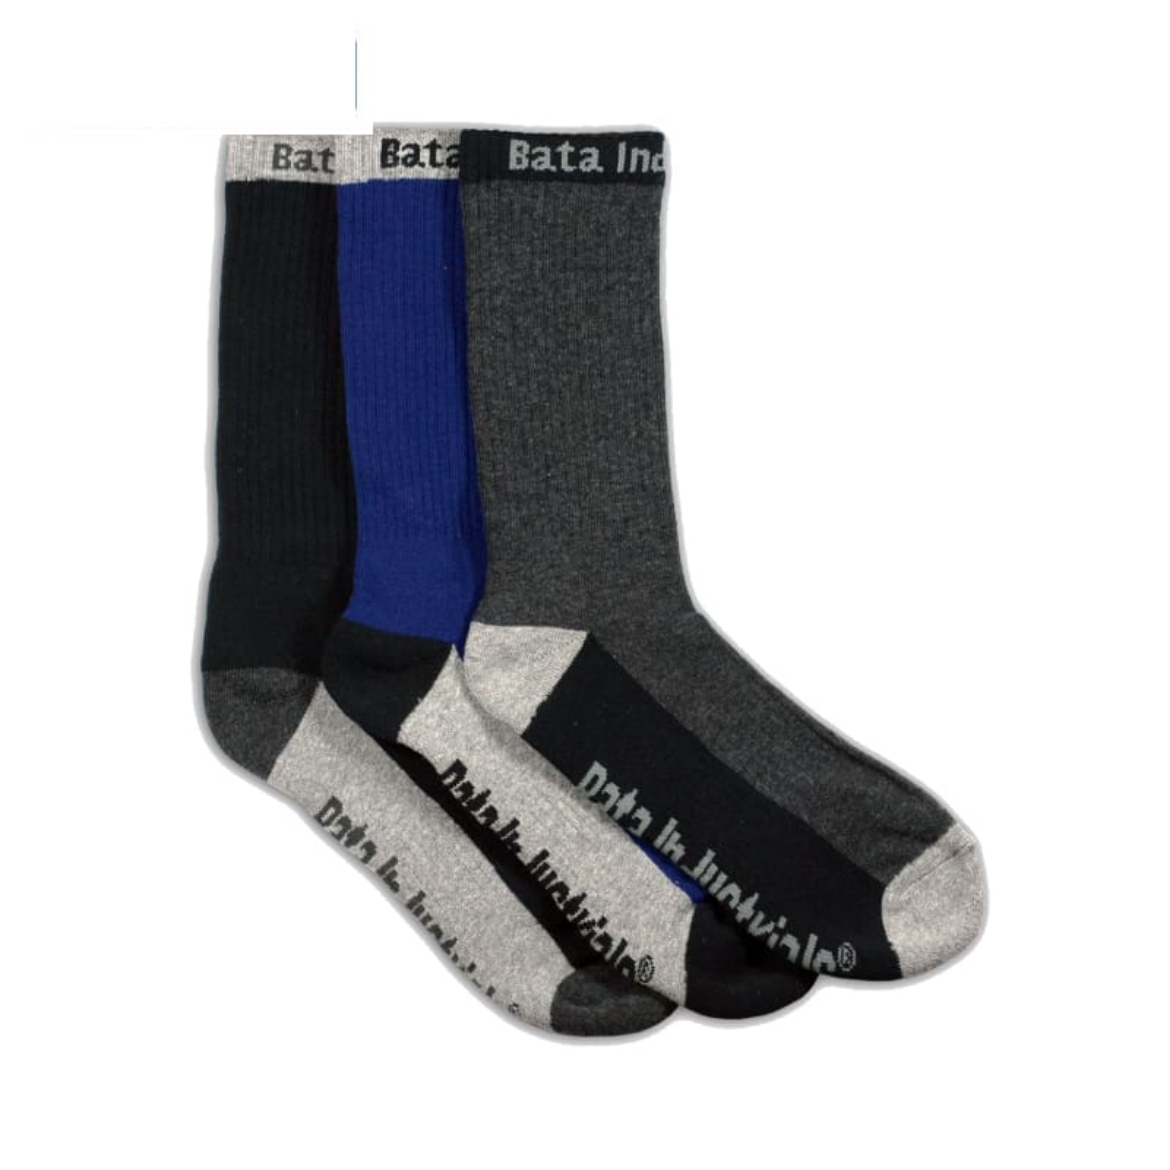 Picture of Bata Industrials, Work Socks, 3 Pack